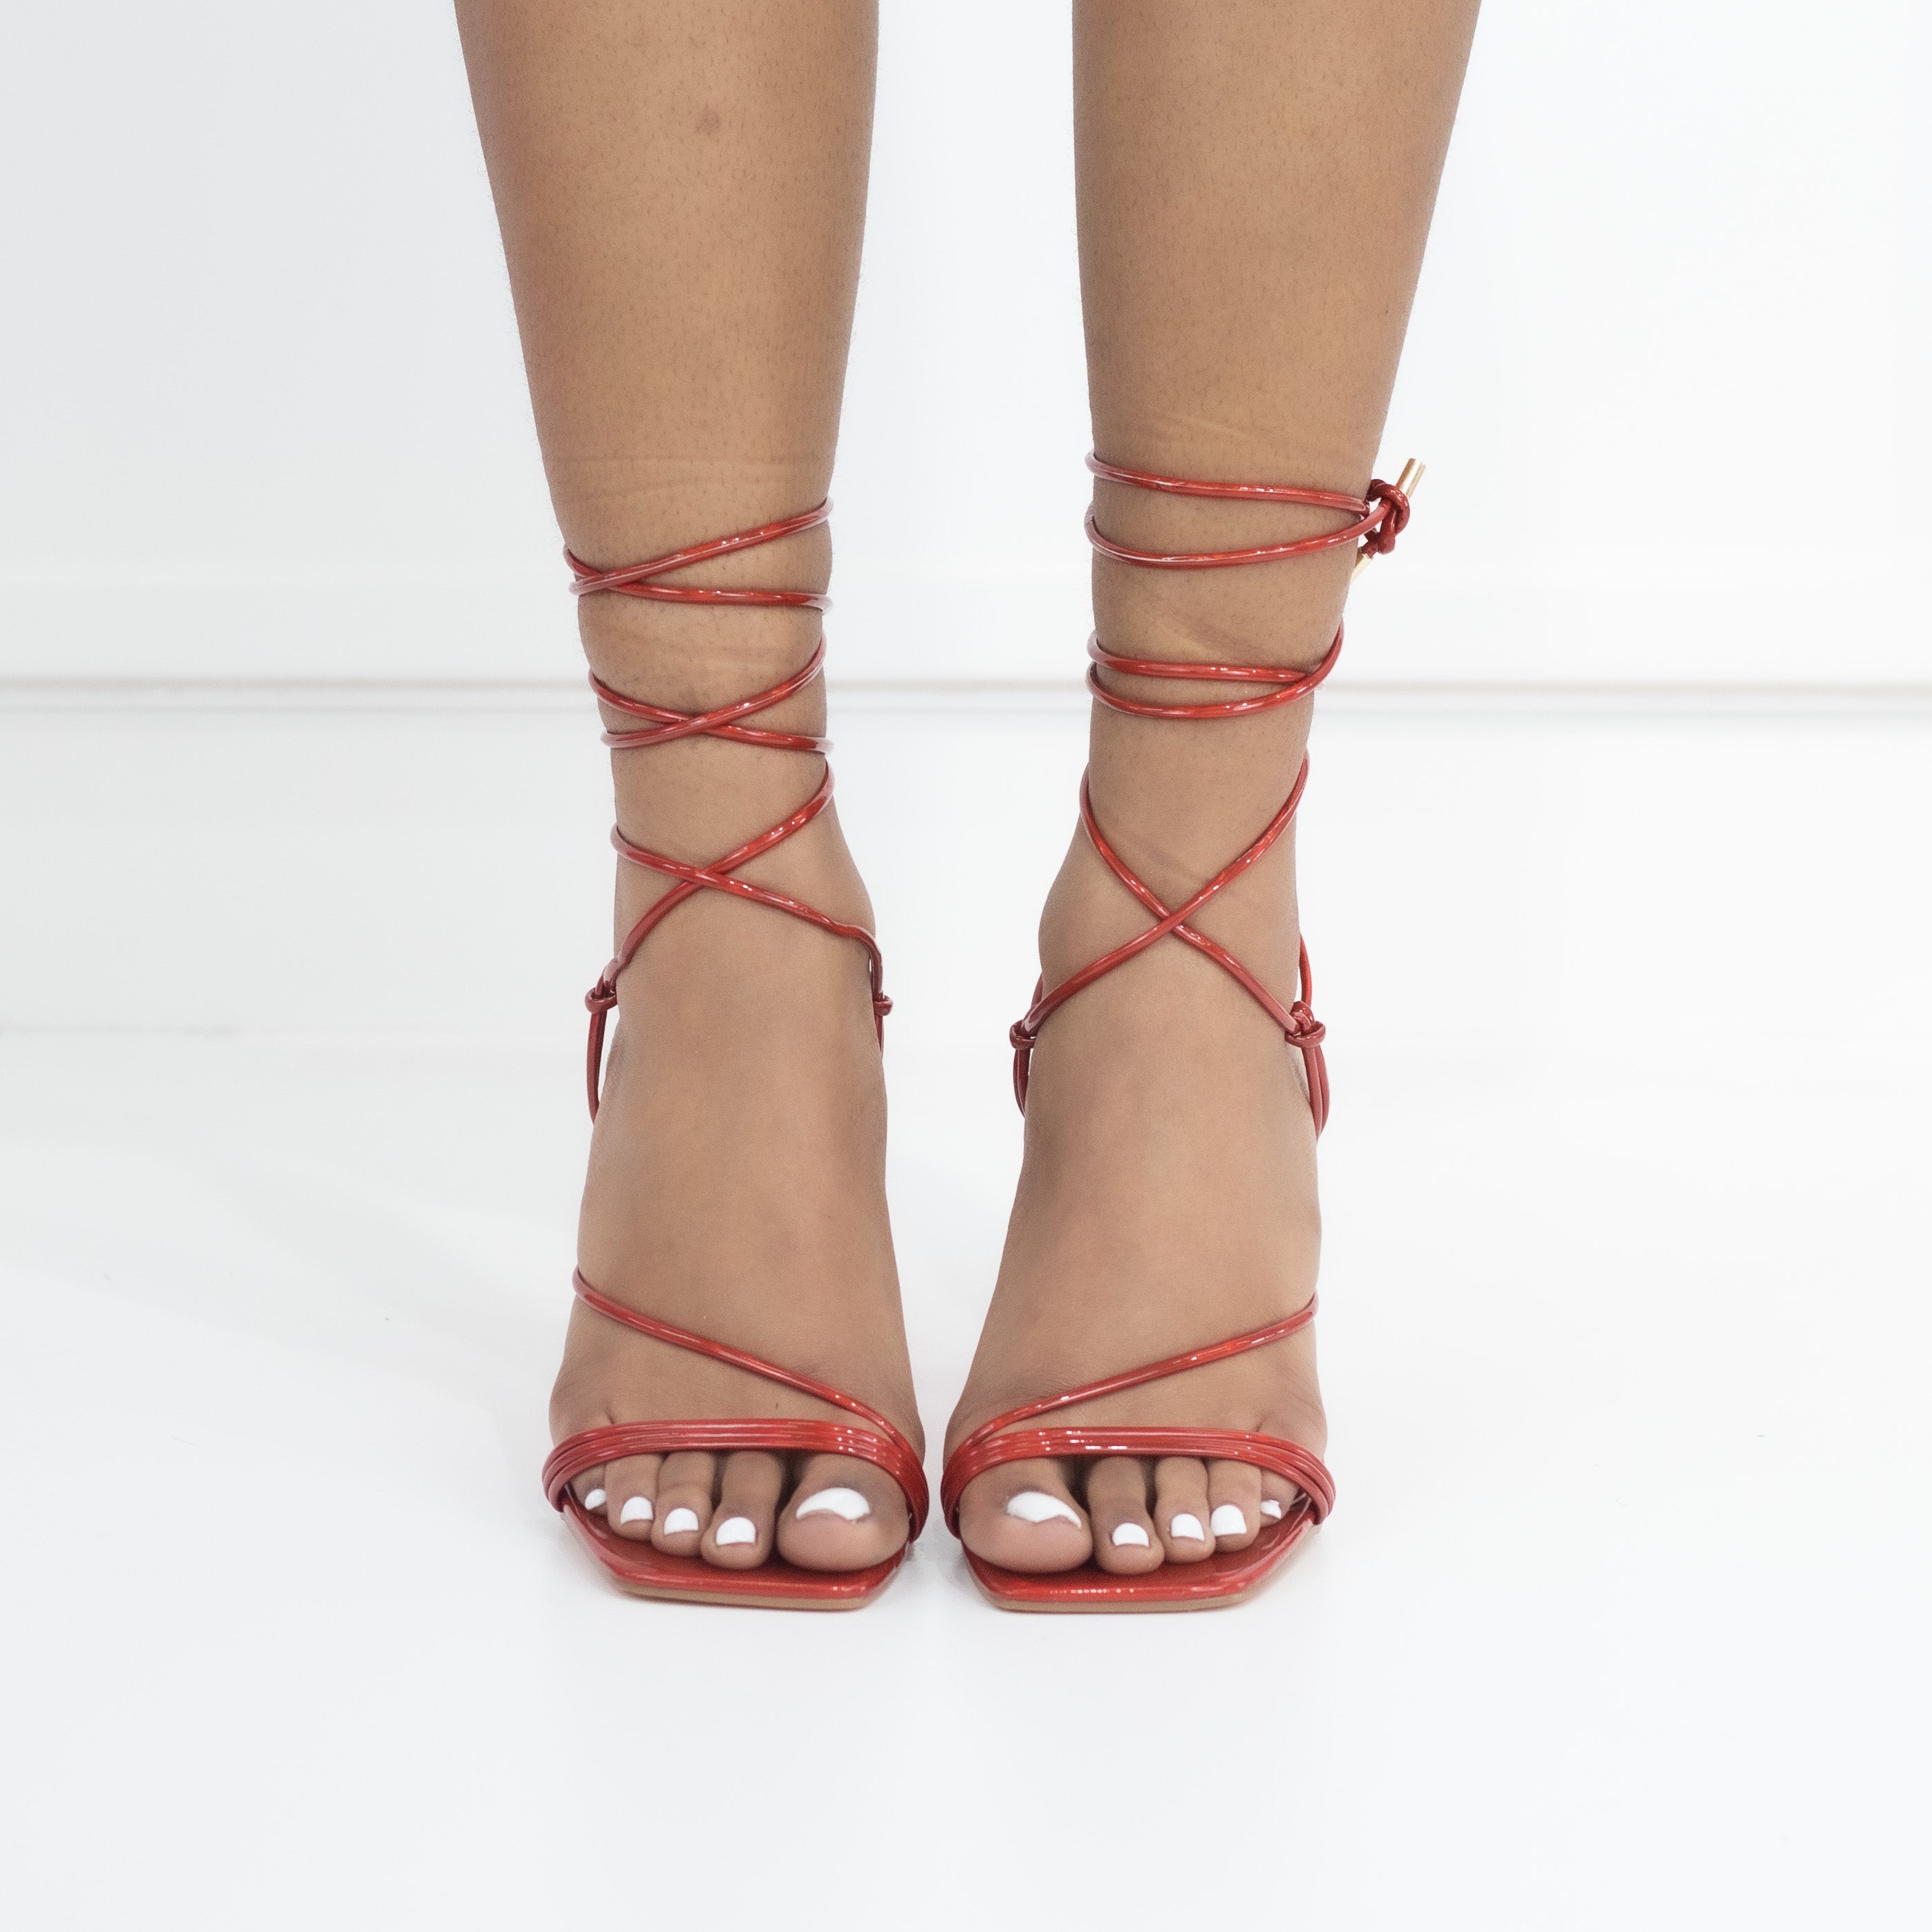 Red strappy sandals on special regt heel nadzia